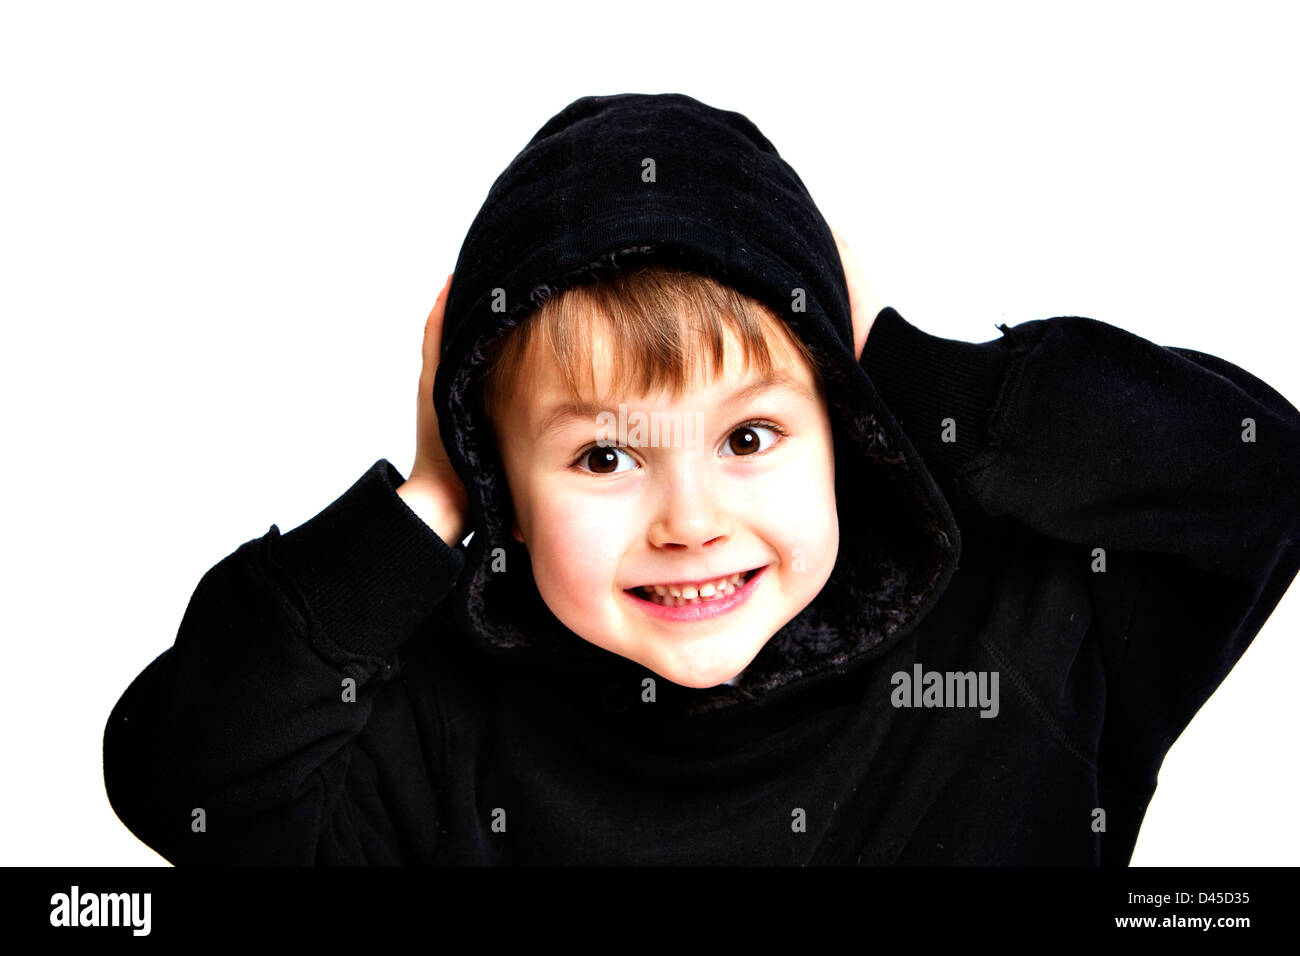 Young boy in a black hoodie sweatshirt with sallow skin brown hair and brown eyes against a white background making faces for the camera Stock Photo